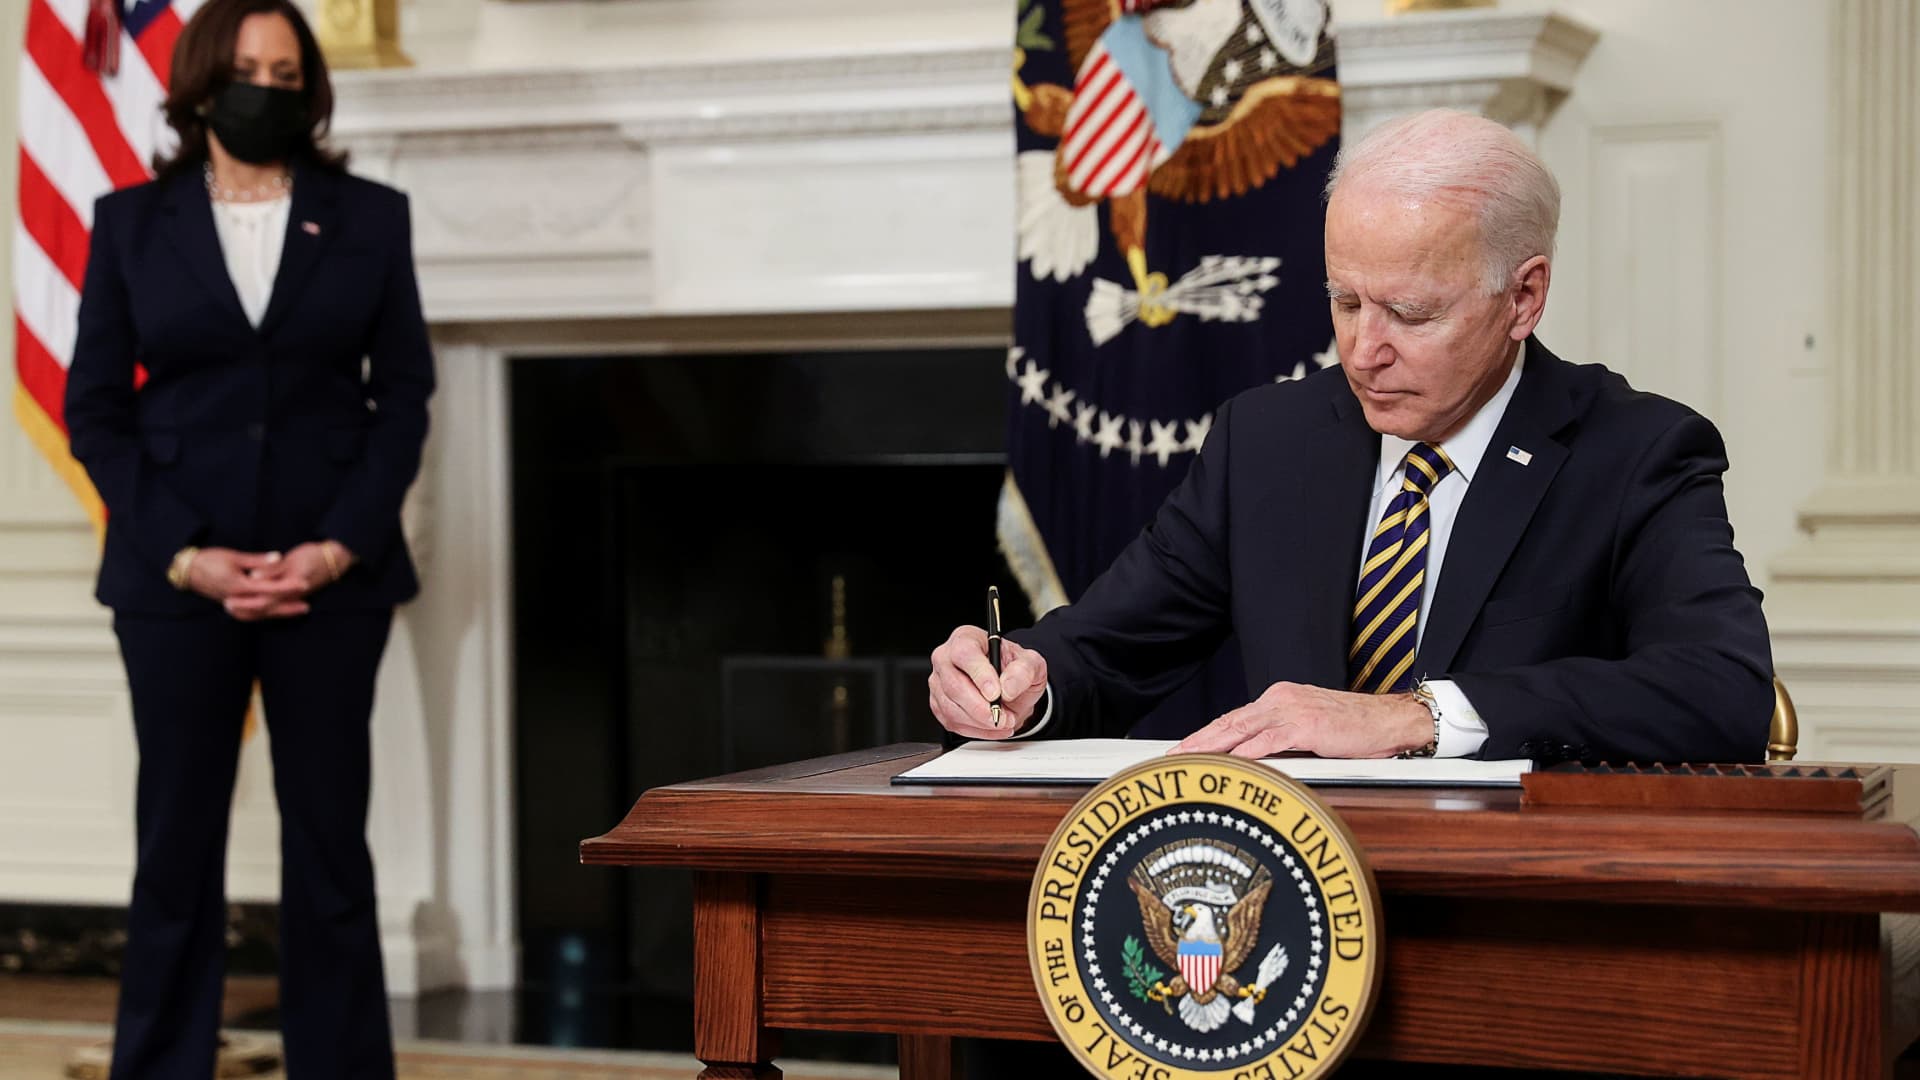 U.S. President Joe Biden signs an executive order, aimed at addressing a global semiconductor chip shortage, as Vice President Kamala Harris stands by in the State Dining Room at the White House in Washington, February 24, 2021.